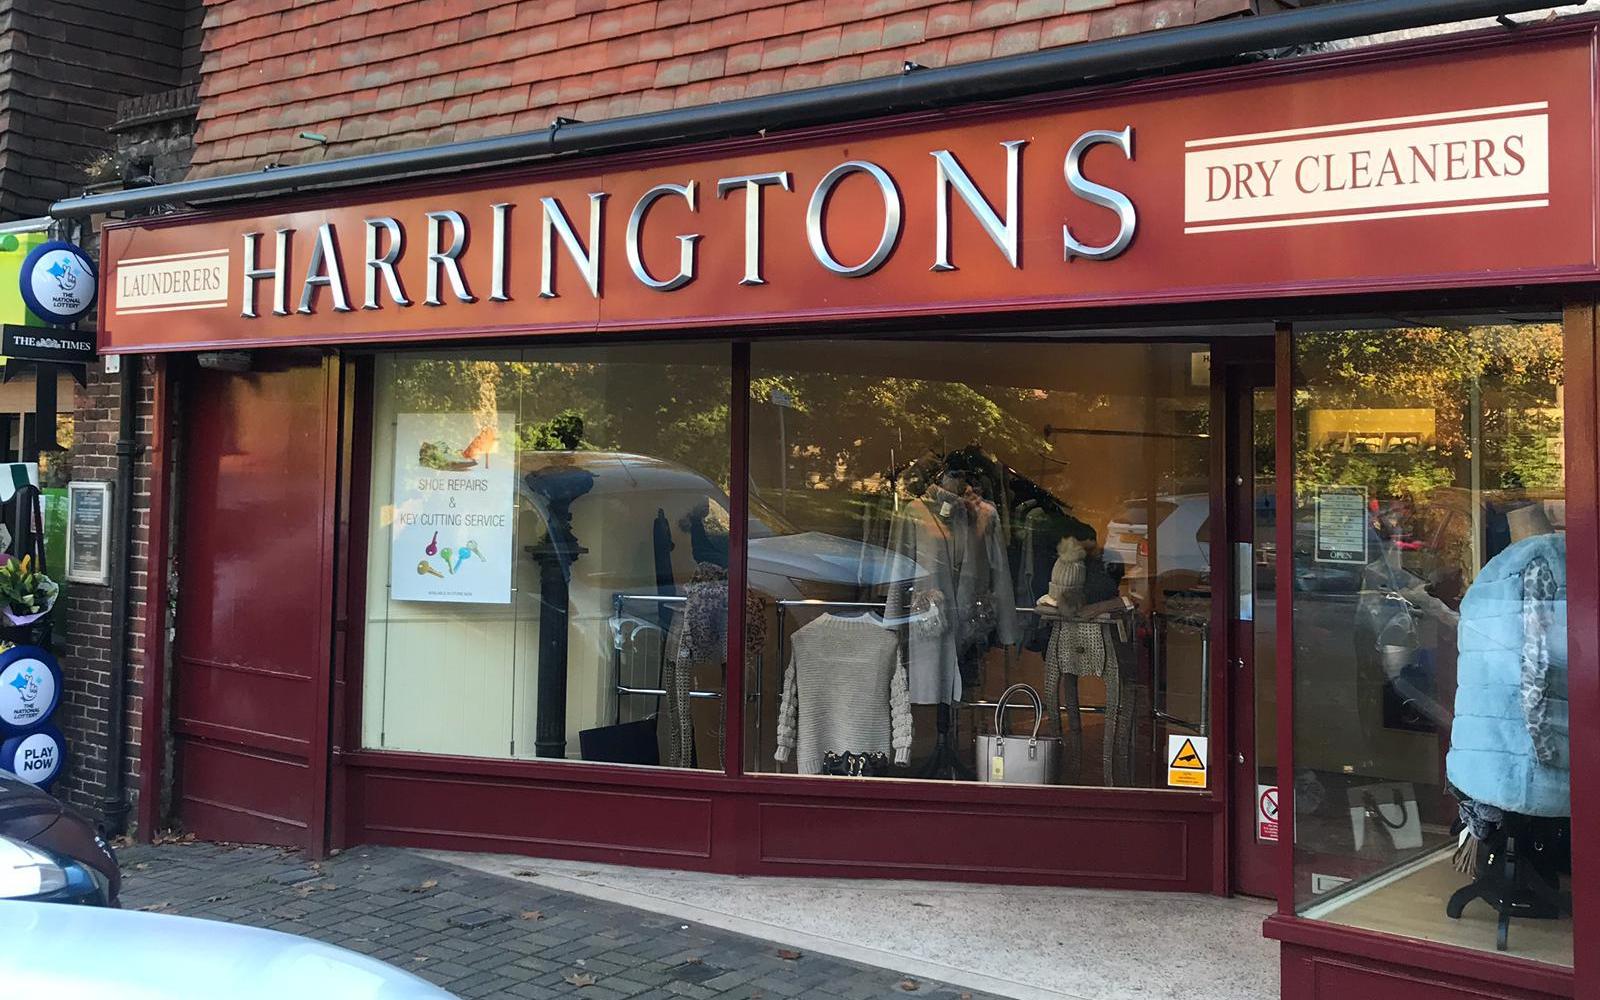 Harringtons Drycleaners